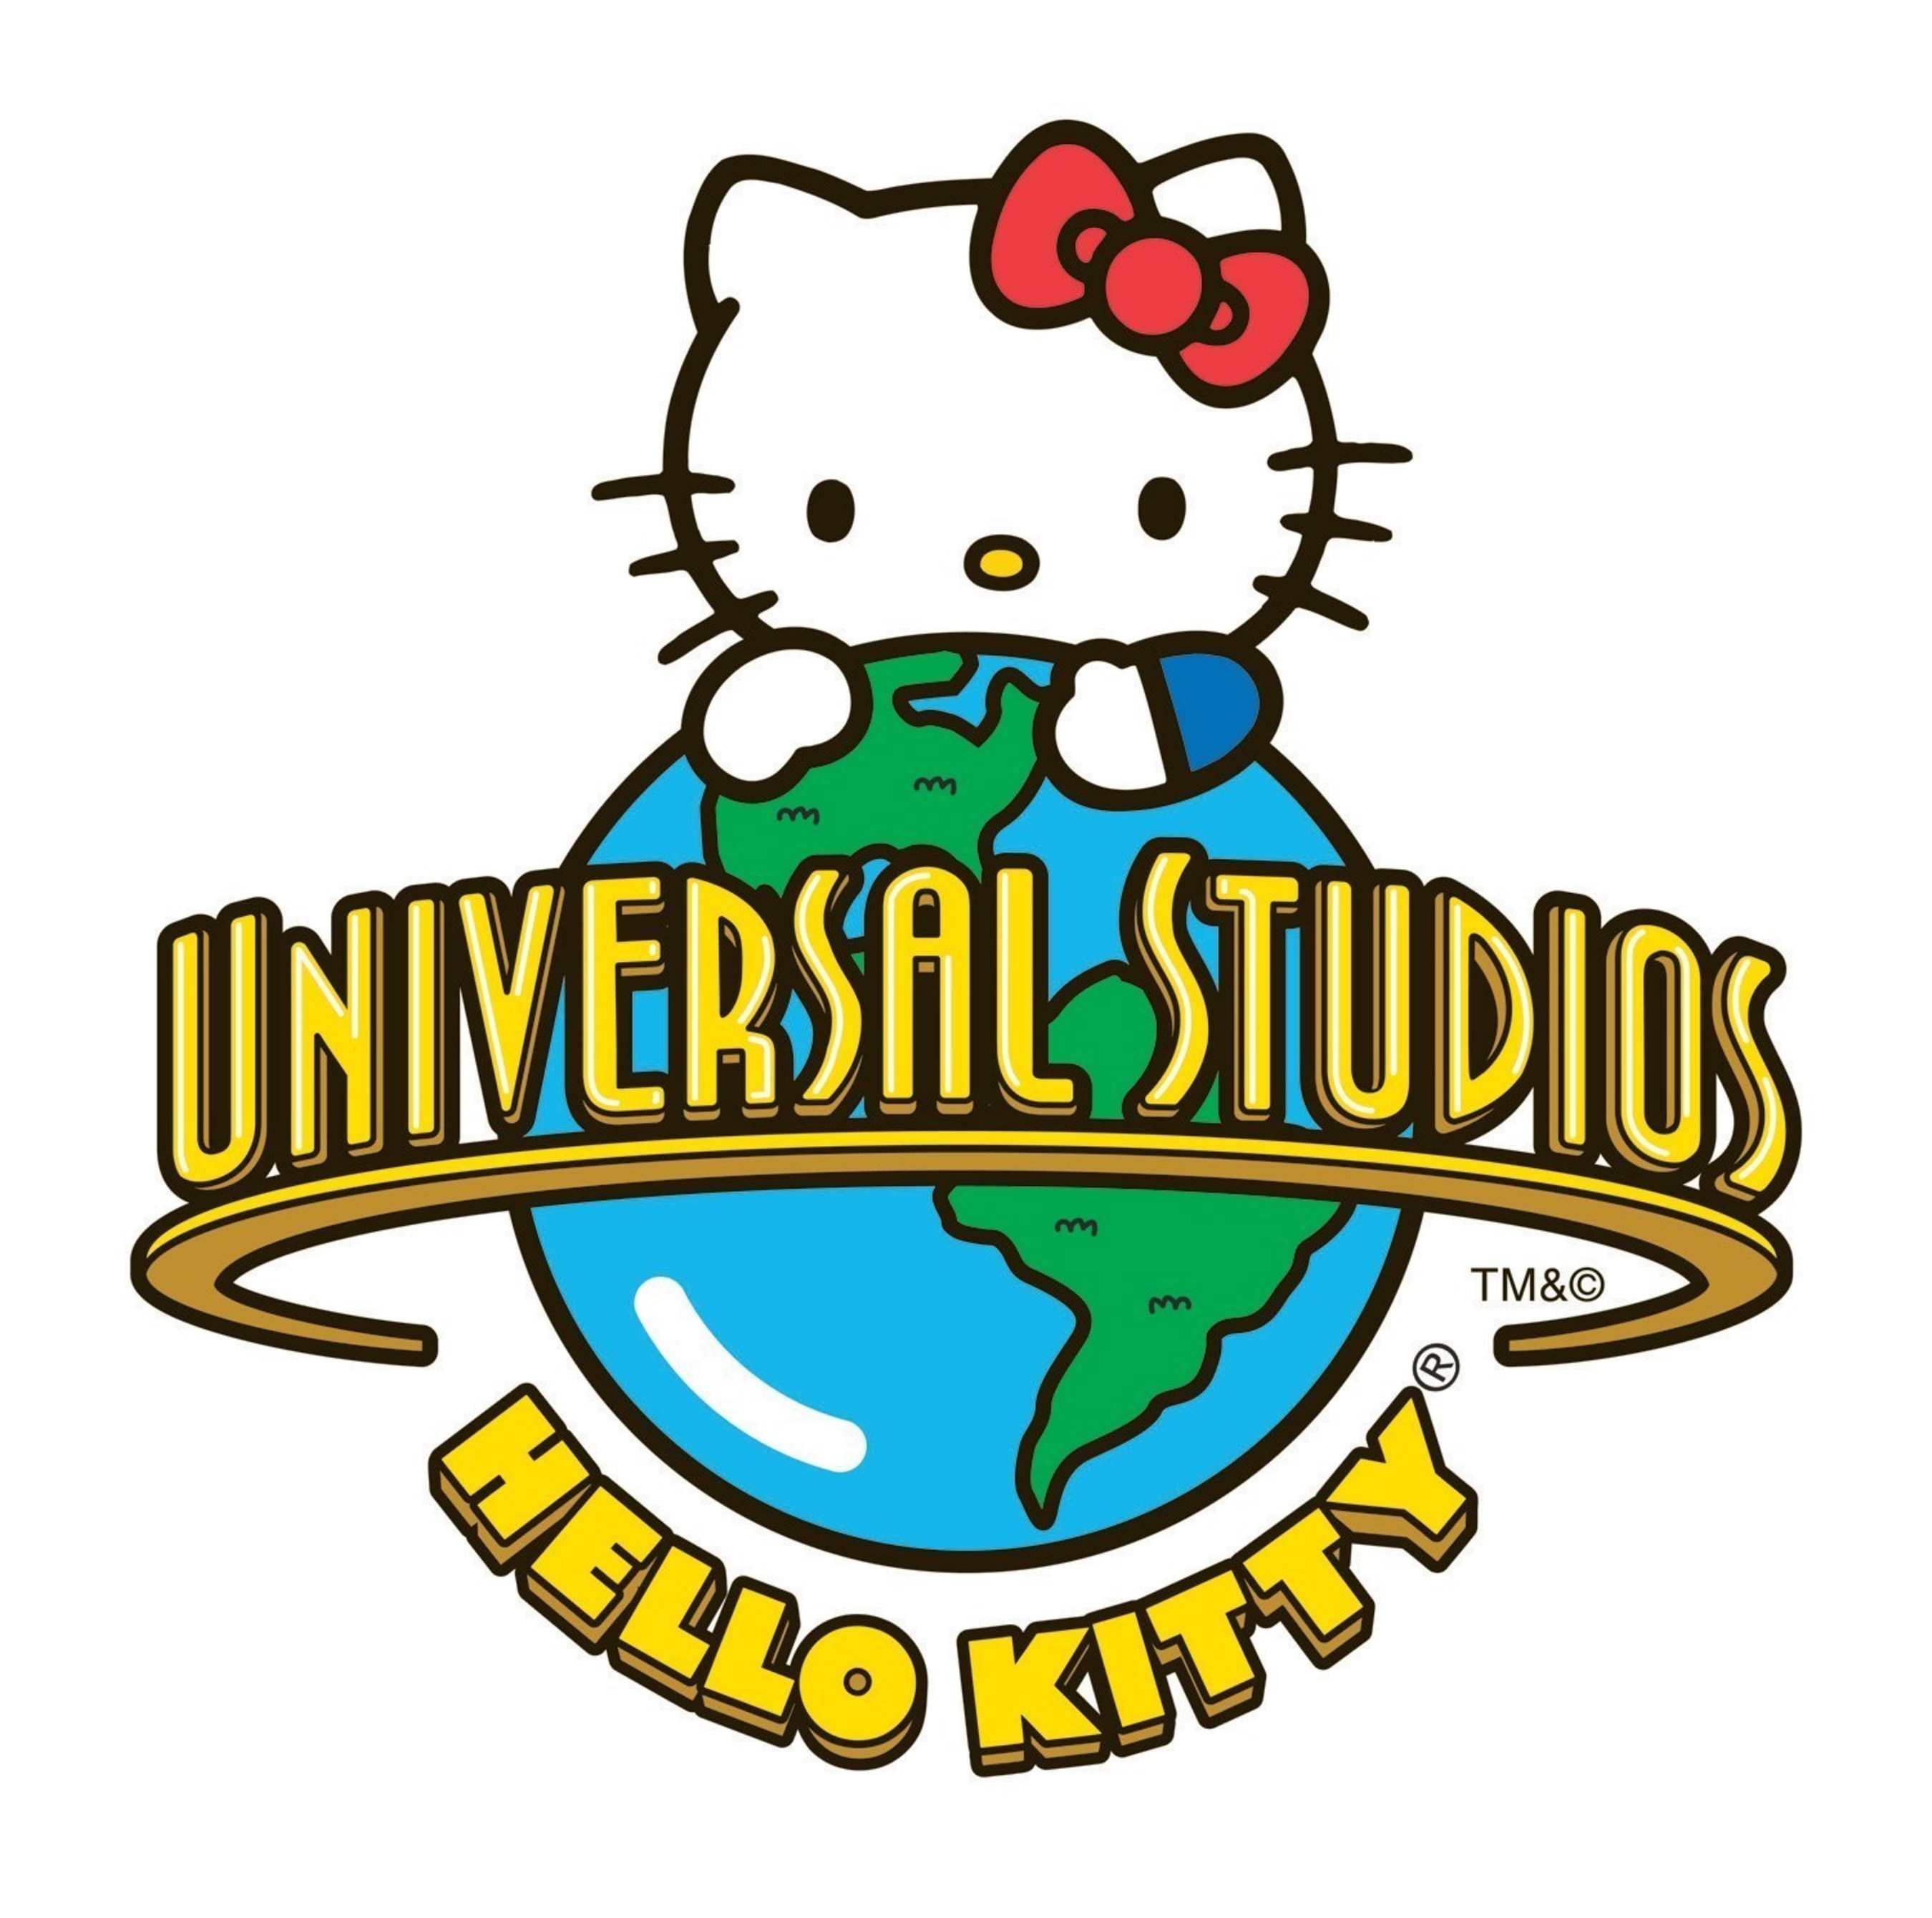 Inside the new Hello Kitty Store at Universal Orlando 